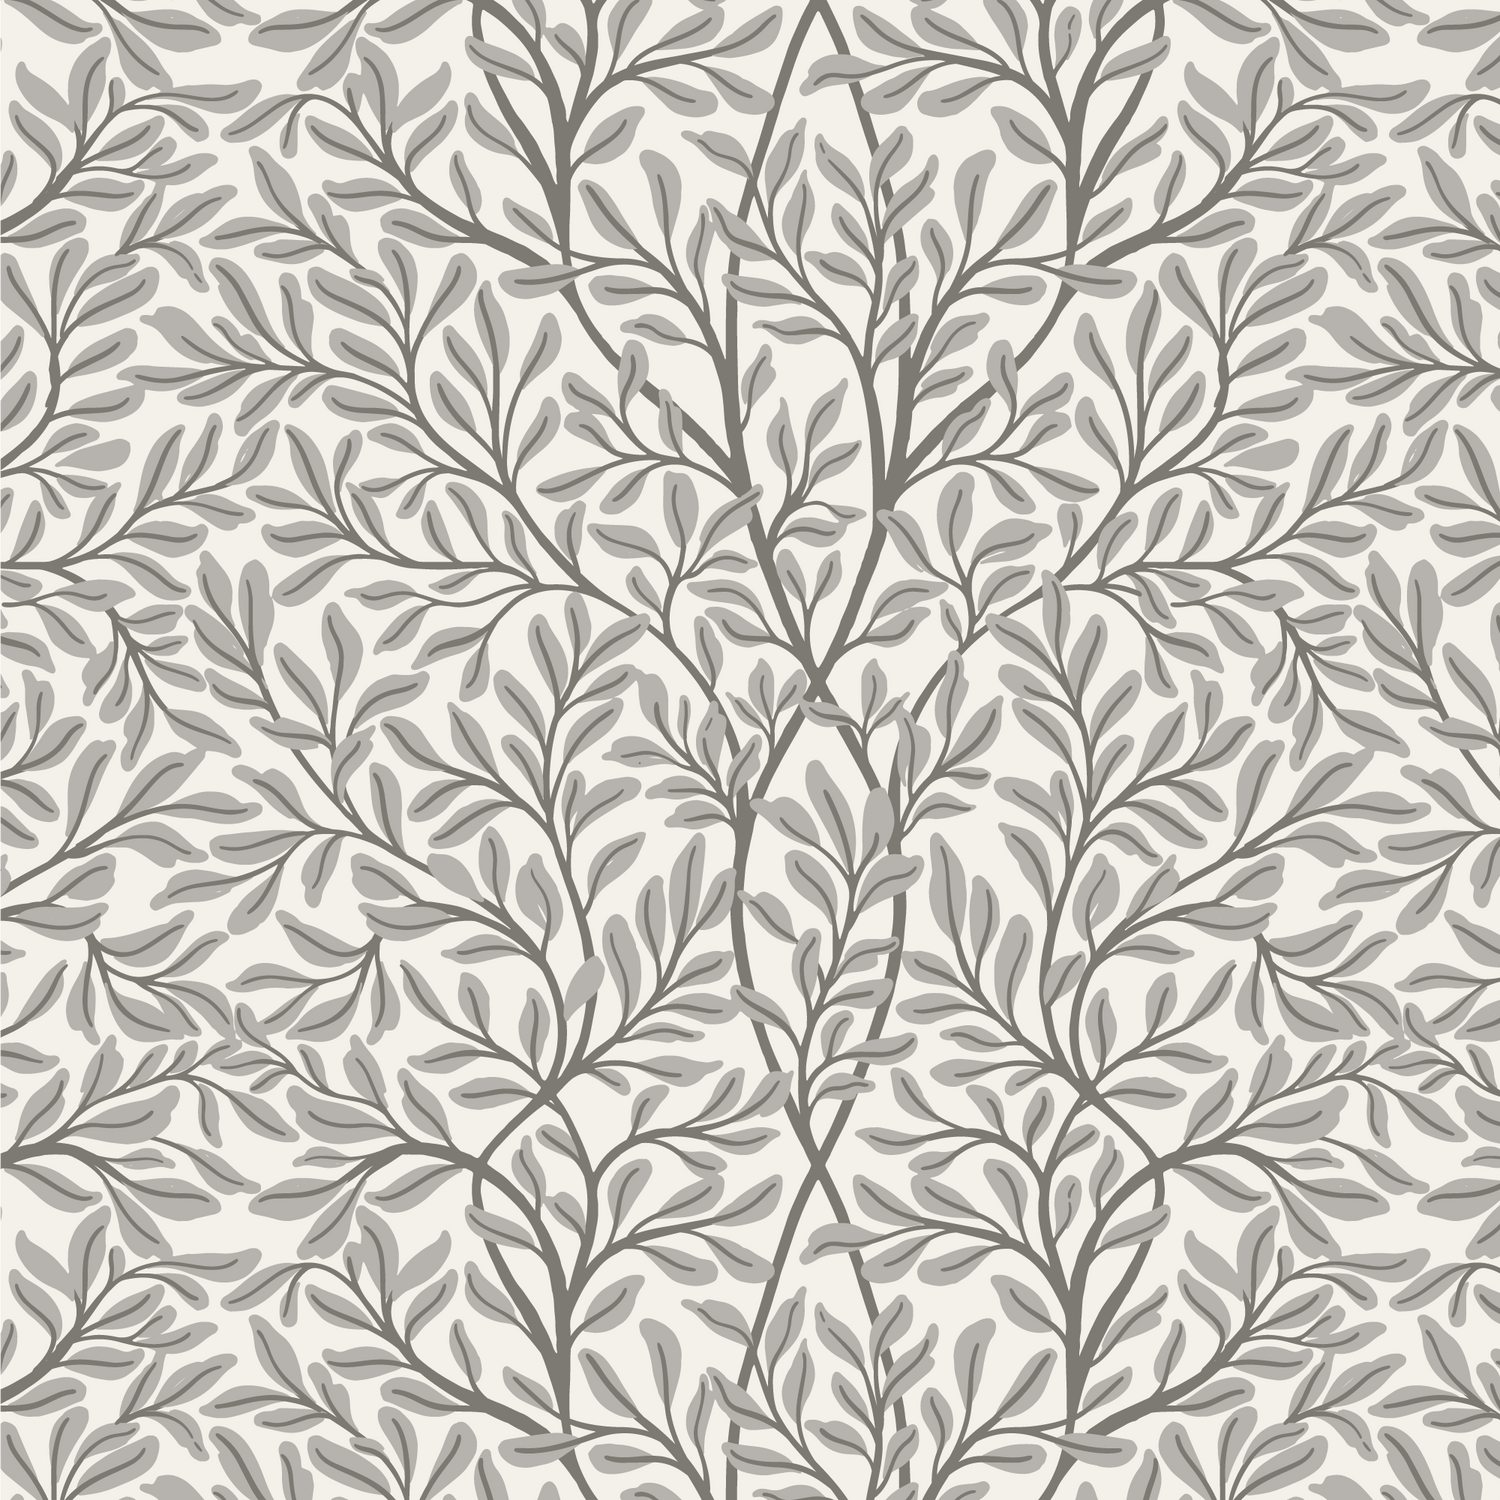 Introducing Nostalgia Nouveau Wallpaper, a luxurious addition to any space. Gray leaves are artfully scattered across the wallpaper, bringing a sense of nostalgia and sophistication.